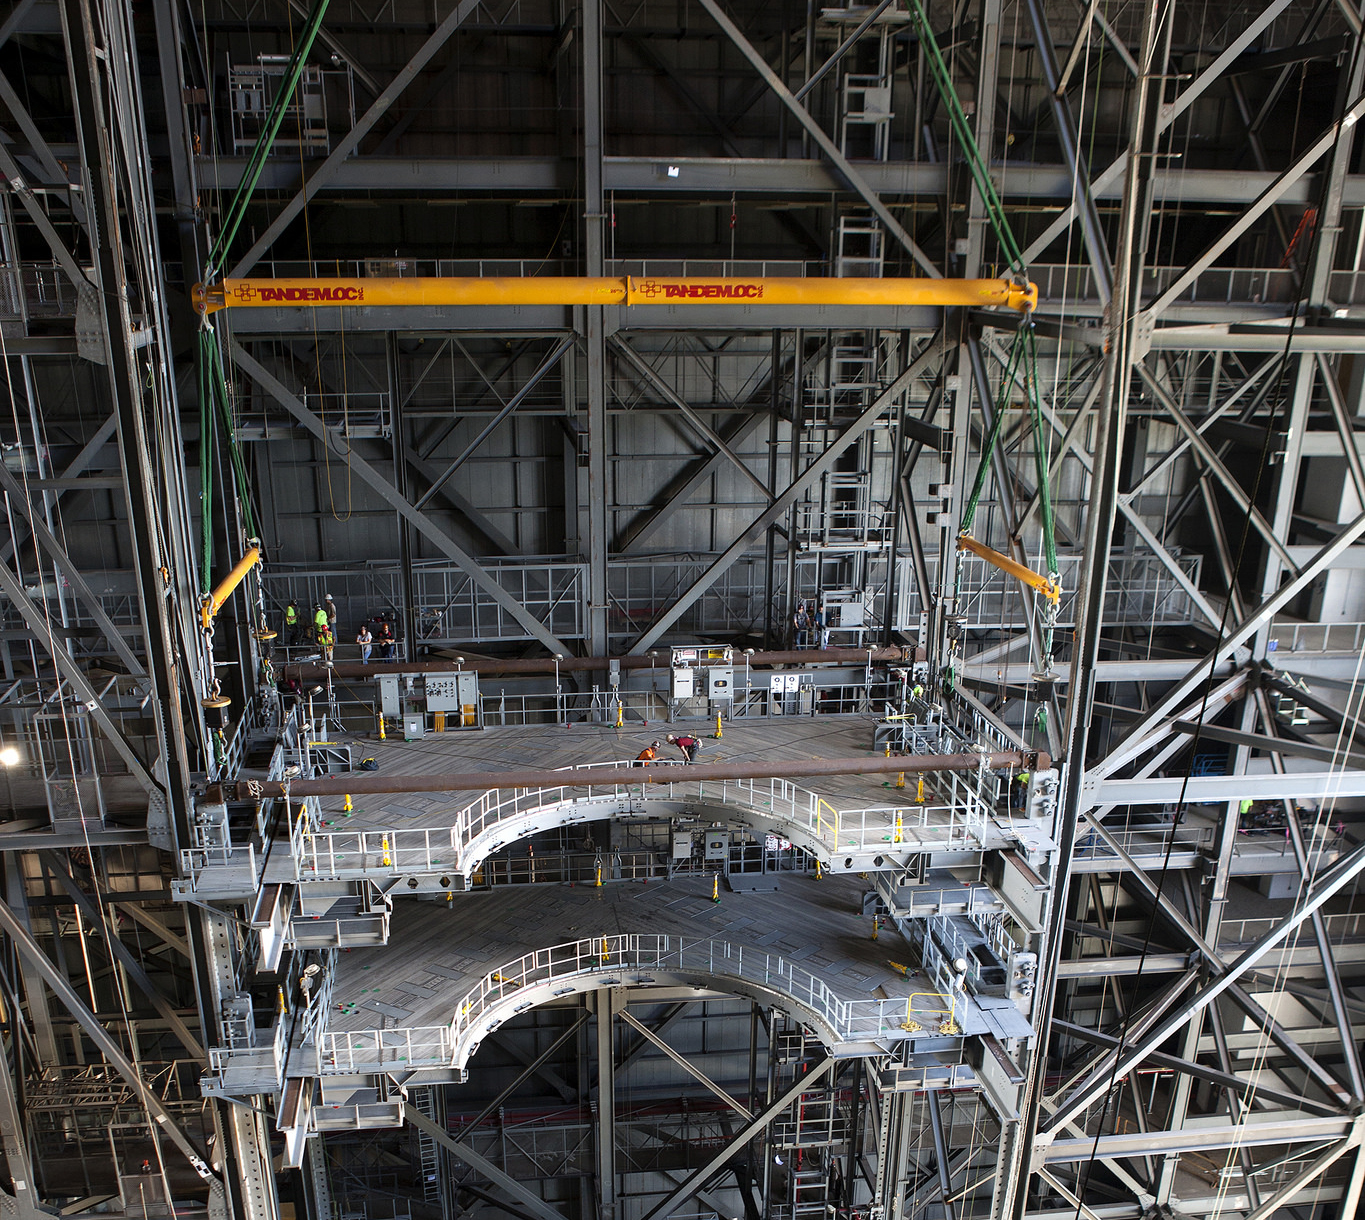 From NASA: "A heavy-lift crane lowers the second half of the D-level work platforms, D north, for NASA’s Space Launch System (SLS) rocket, into position Sept. 9 for installation in High Bay 3 in the Vehicle Assembly Building at the agency’s Kennedy Space Center in Florida." Photo Credit: NASA/Ben Smegelsky